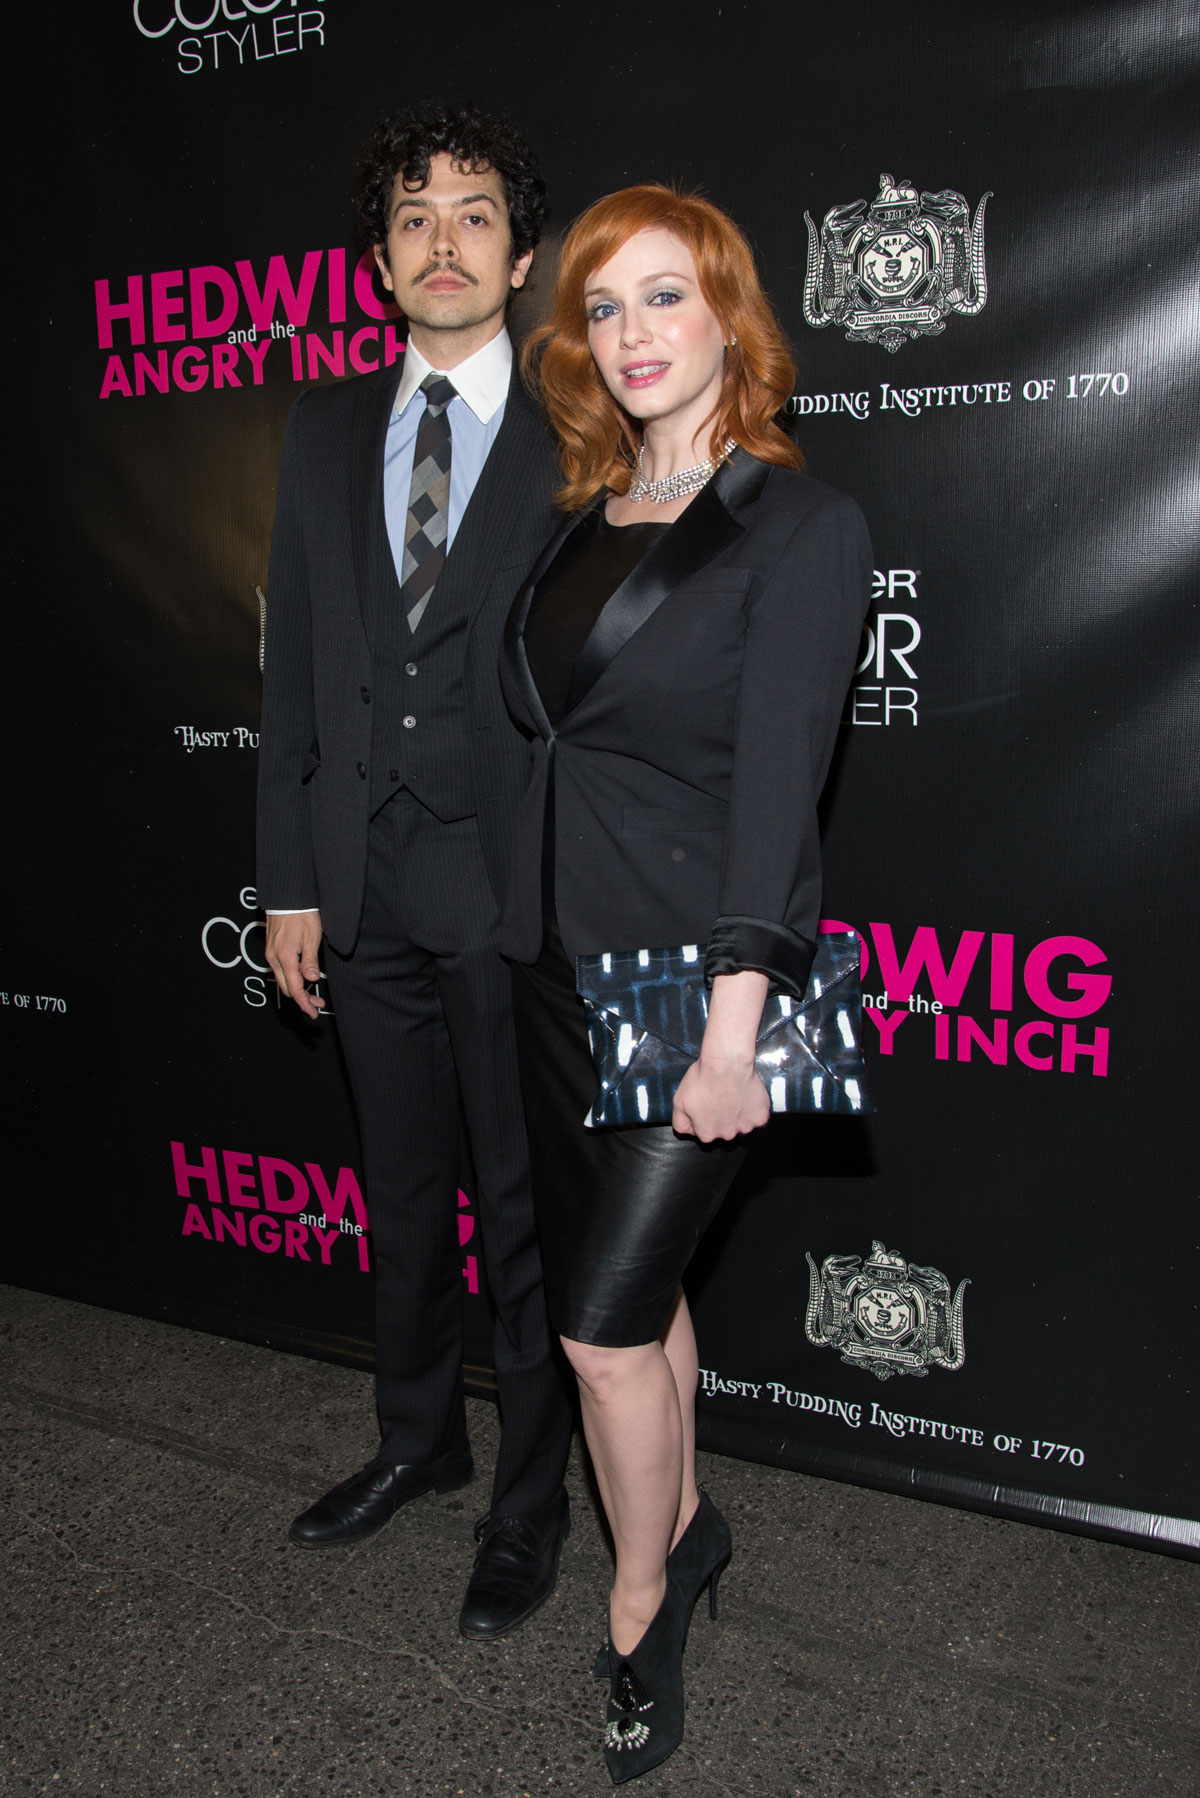 Christina Hendricks attends Hedwig And The Angry Inch